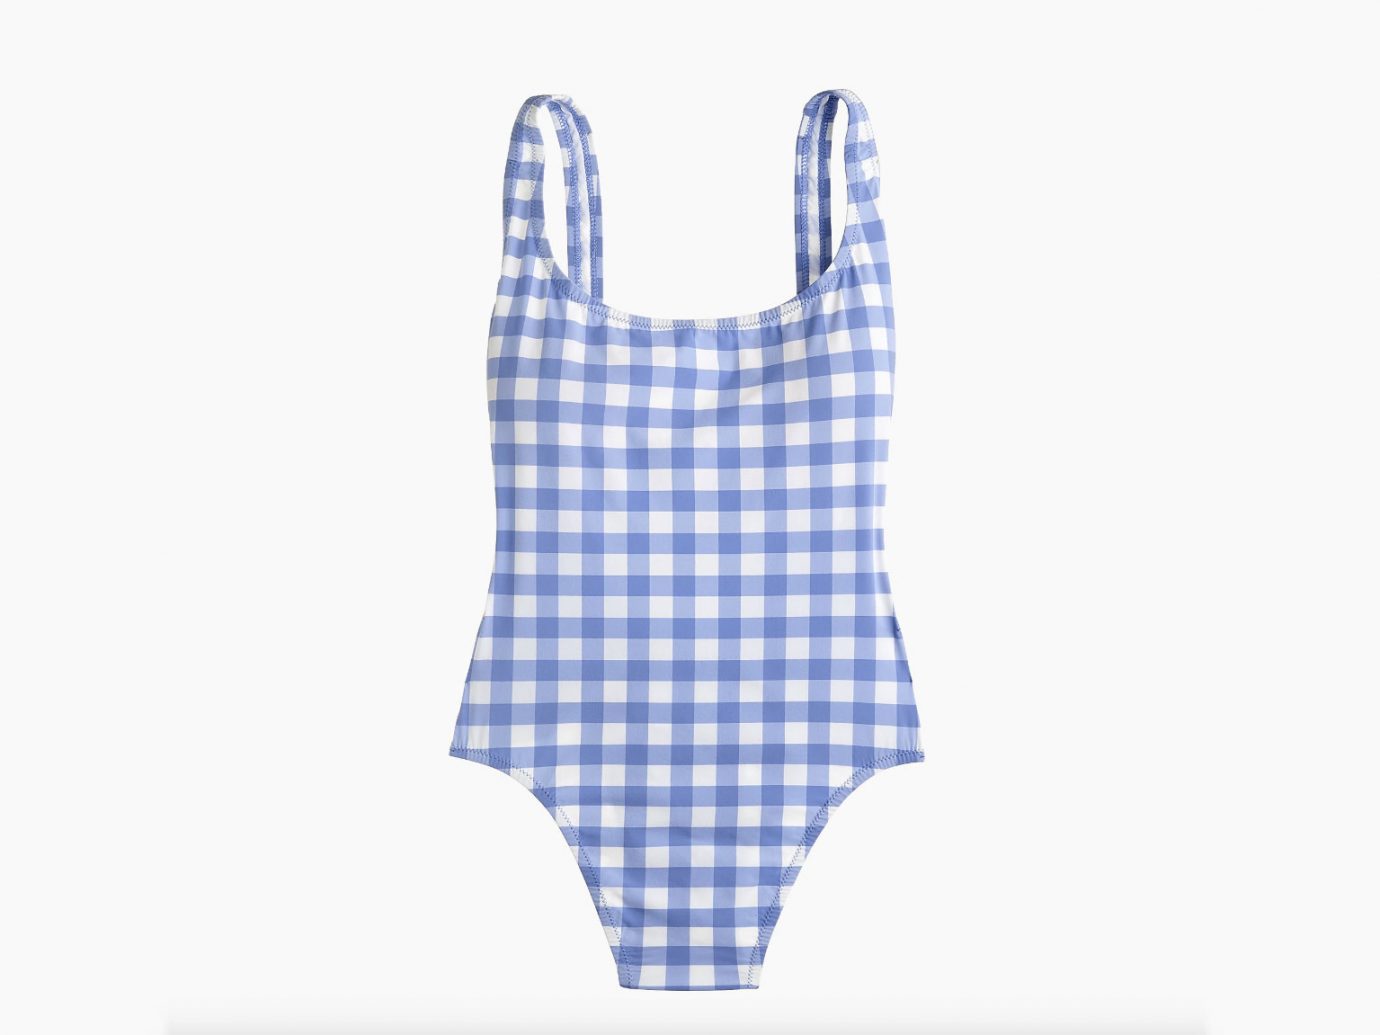 J.Crew Scoopback One Piece Swimsuit in Oversized Matte Gingham